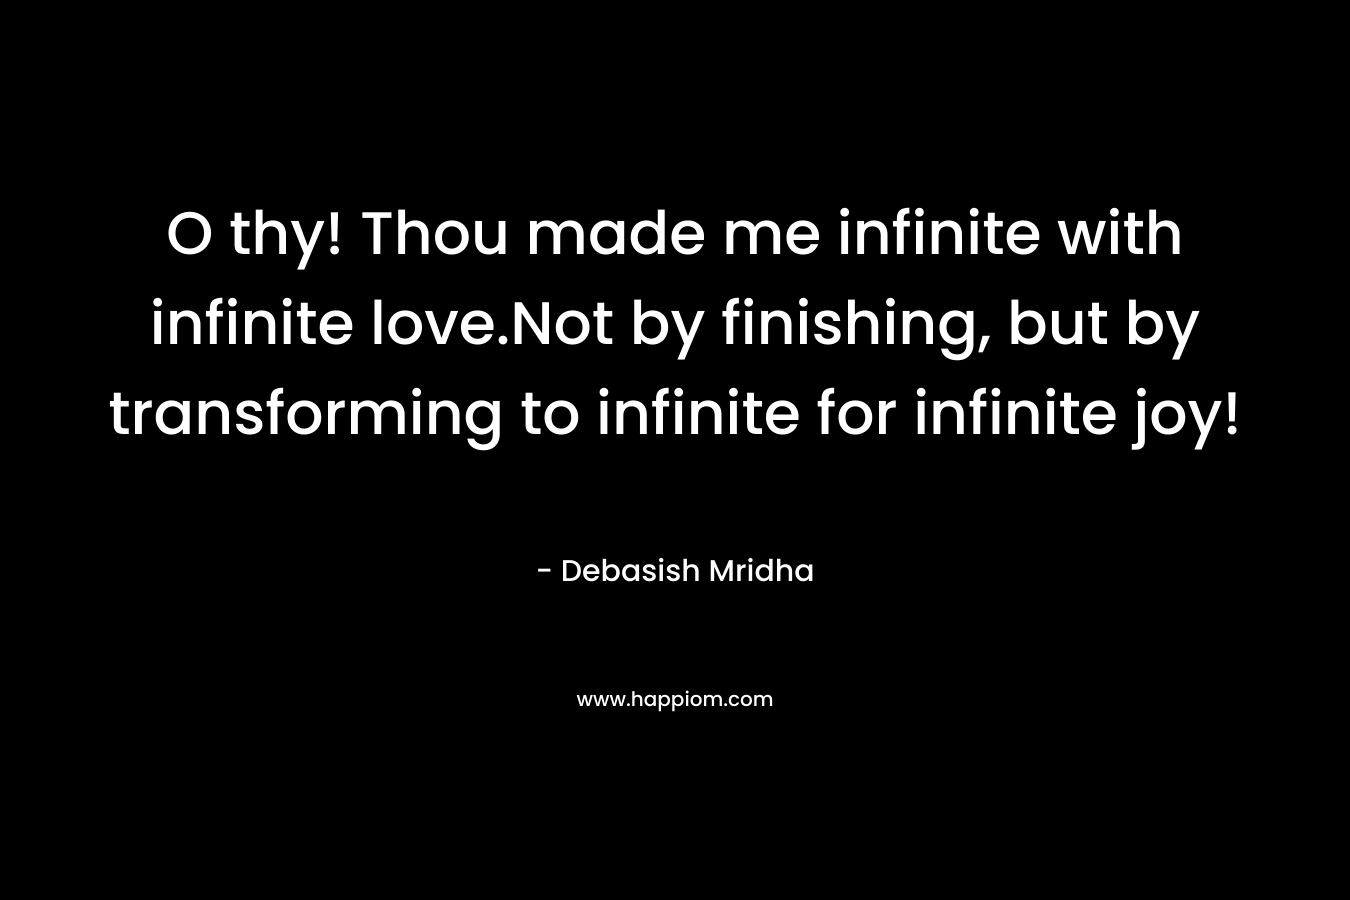 O thy! Thou made me infinite with infinite love.Not by finishing, but by transforming to infinite for infinite joy!